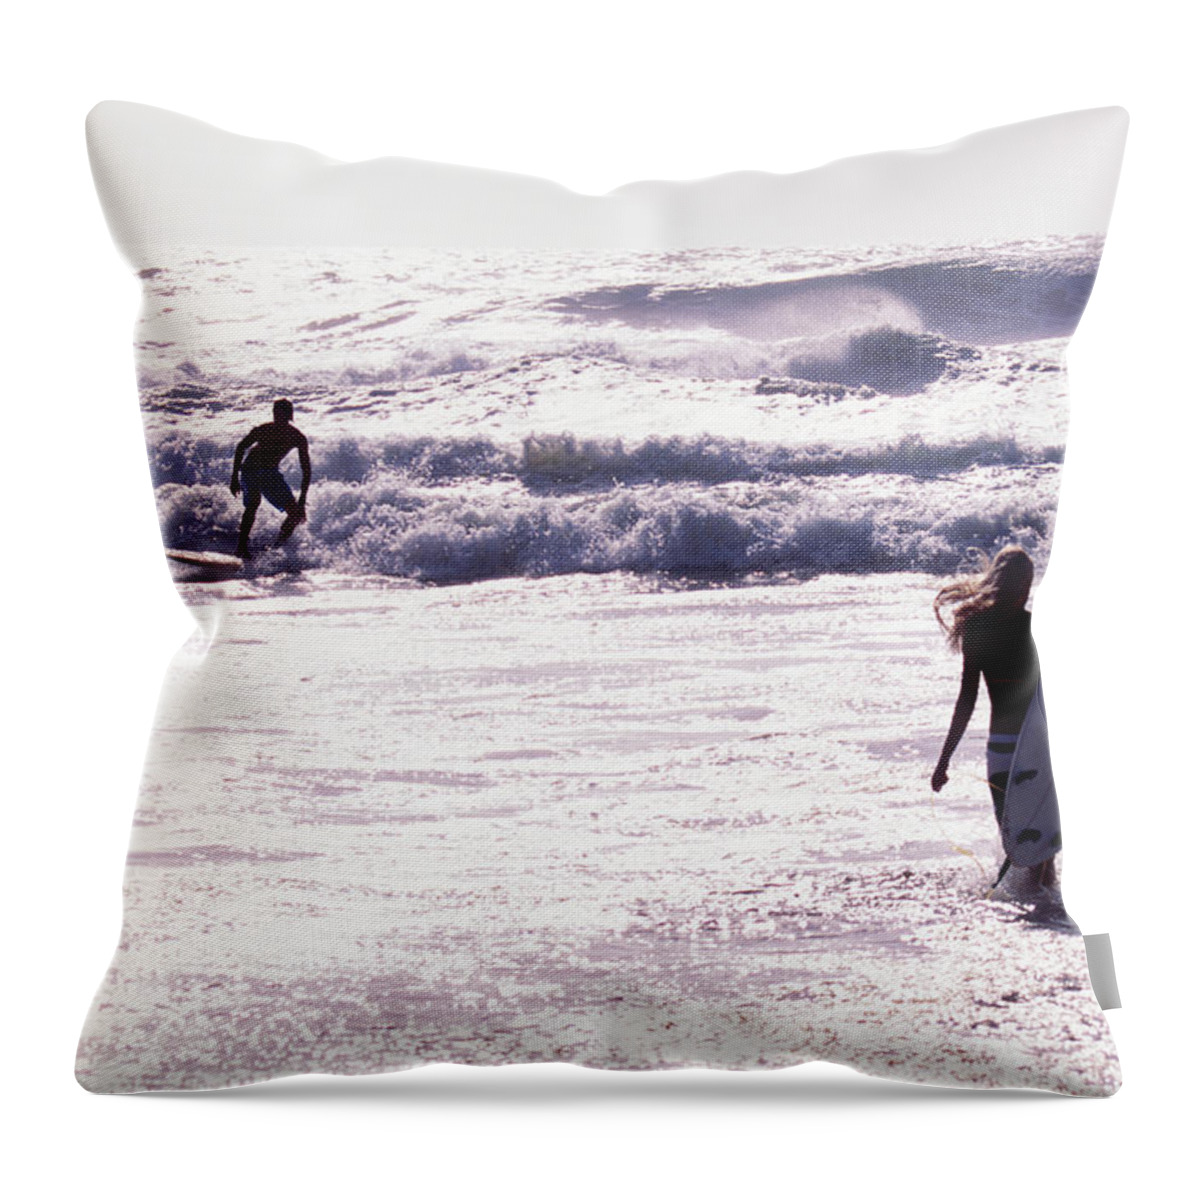 Wind Throw Pillow featuring the photograph Man Surfing On Sea, Woman Walking With by Johner Images